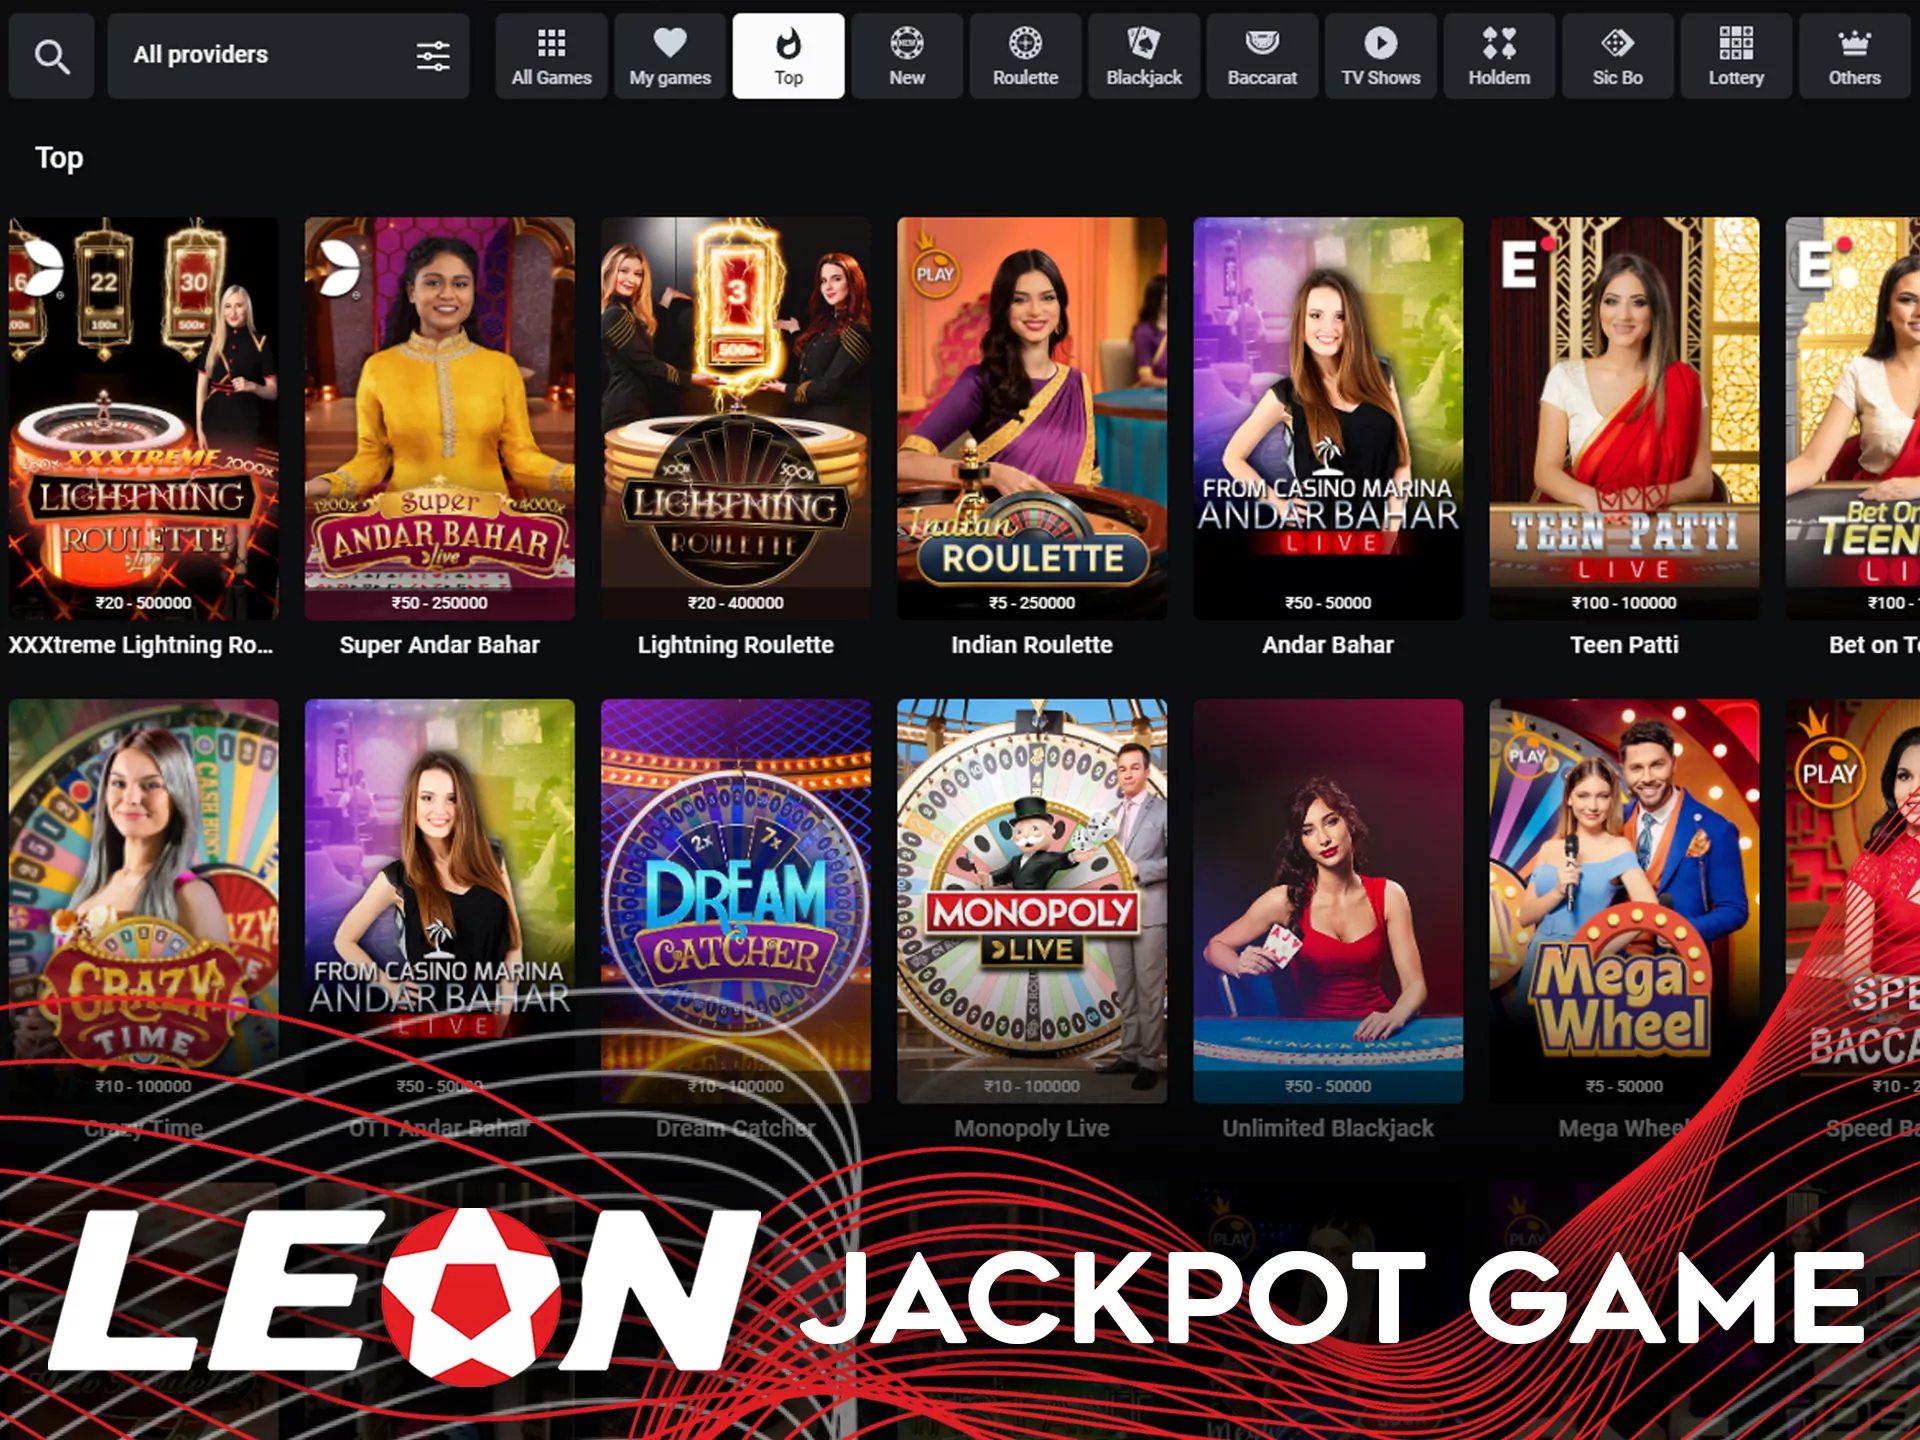 Play jackpot games and get huge winnings at Leon Bet.